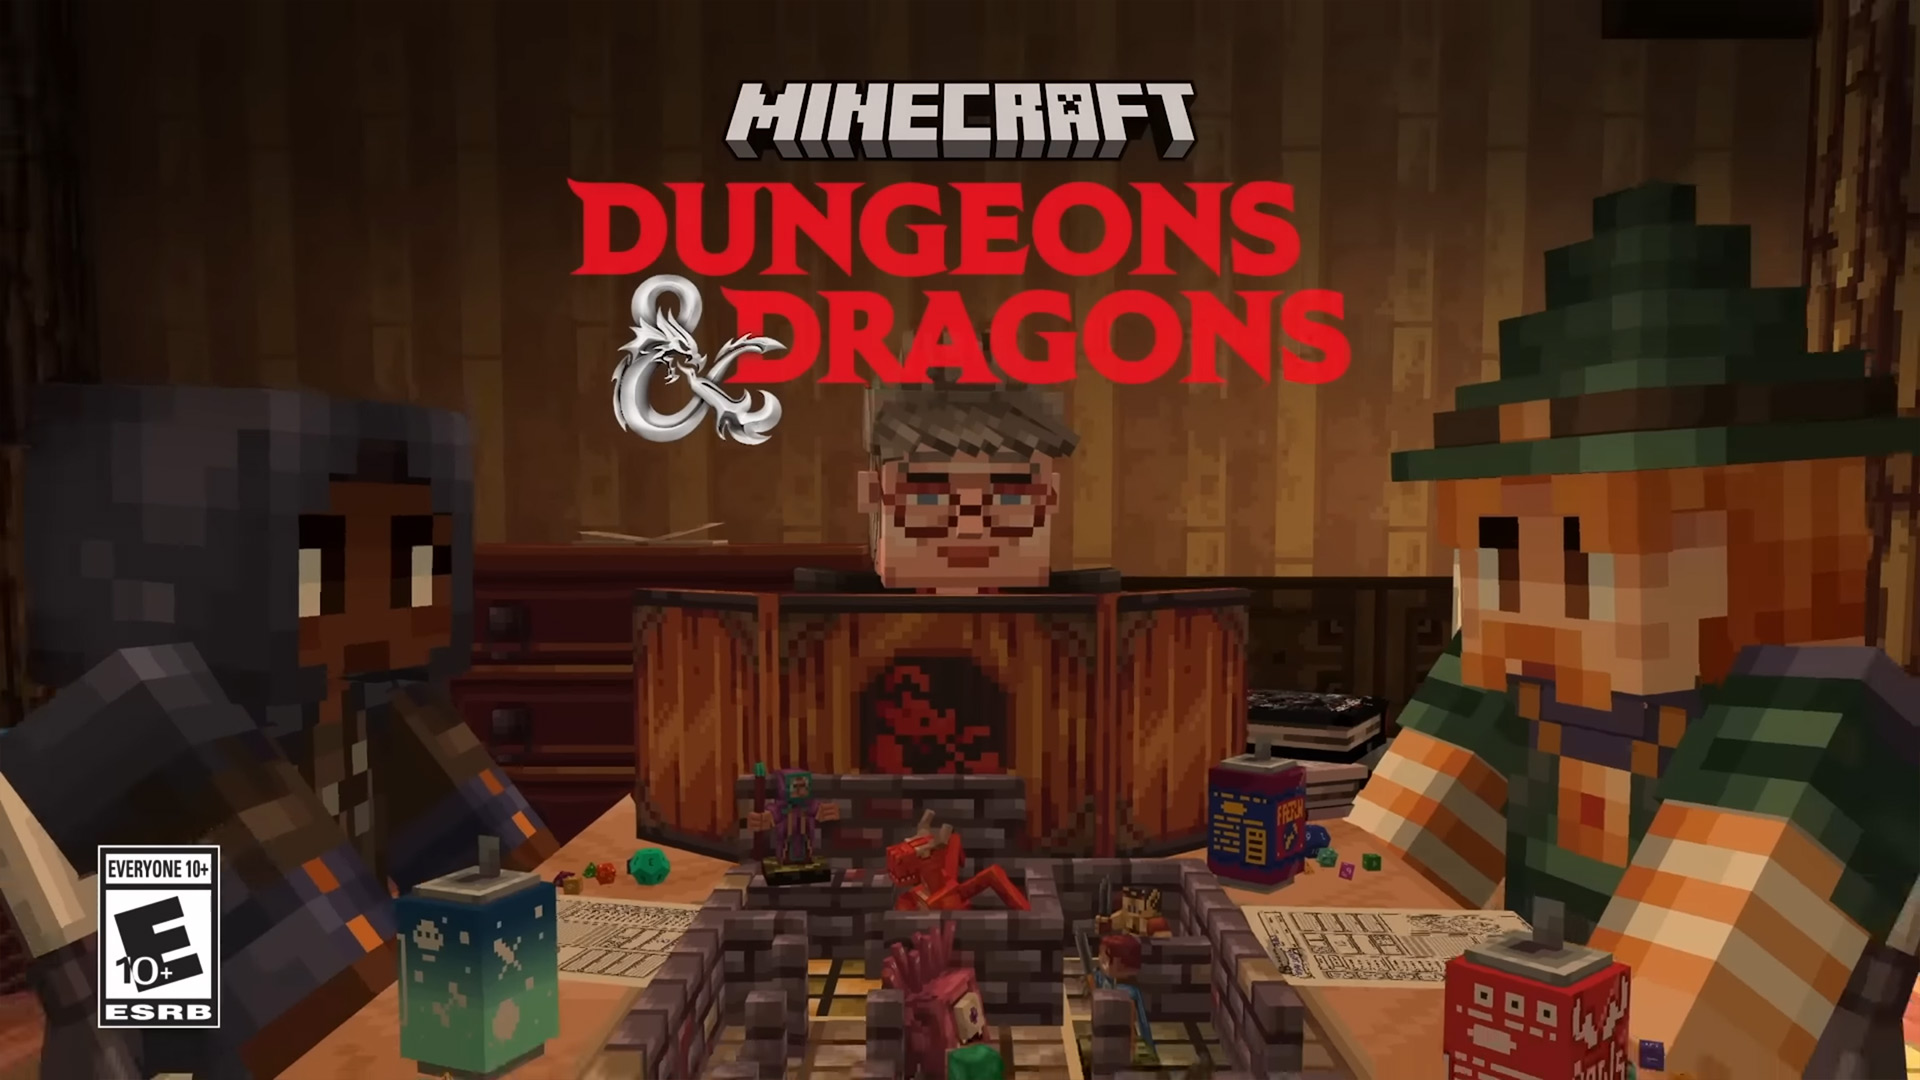 Minecraft is Getting an Official Dungeons & Dragons DLC